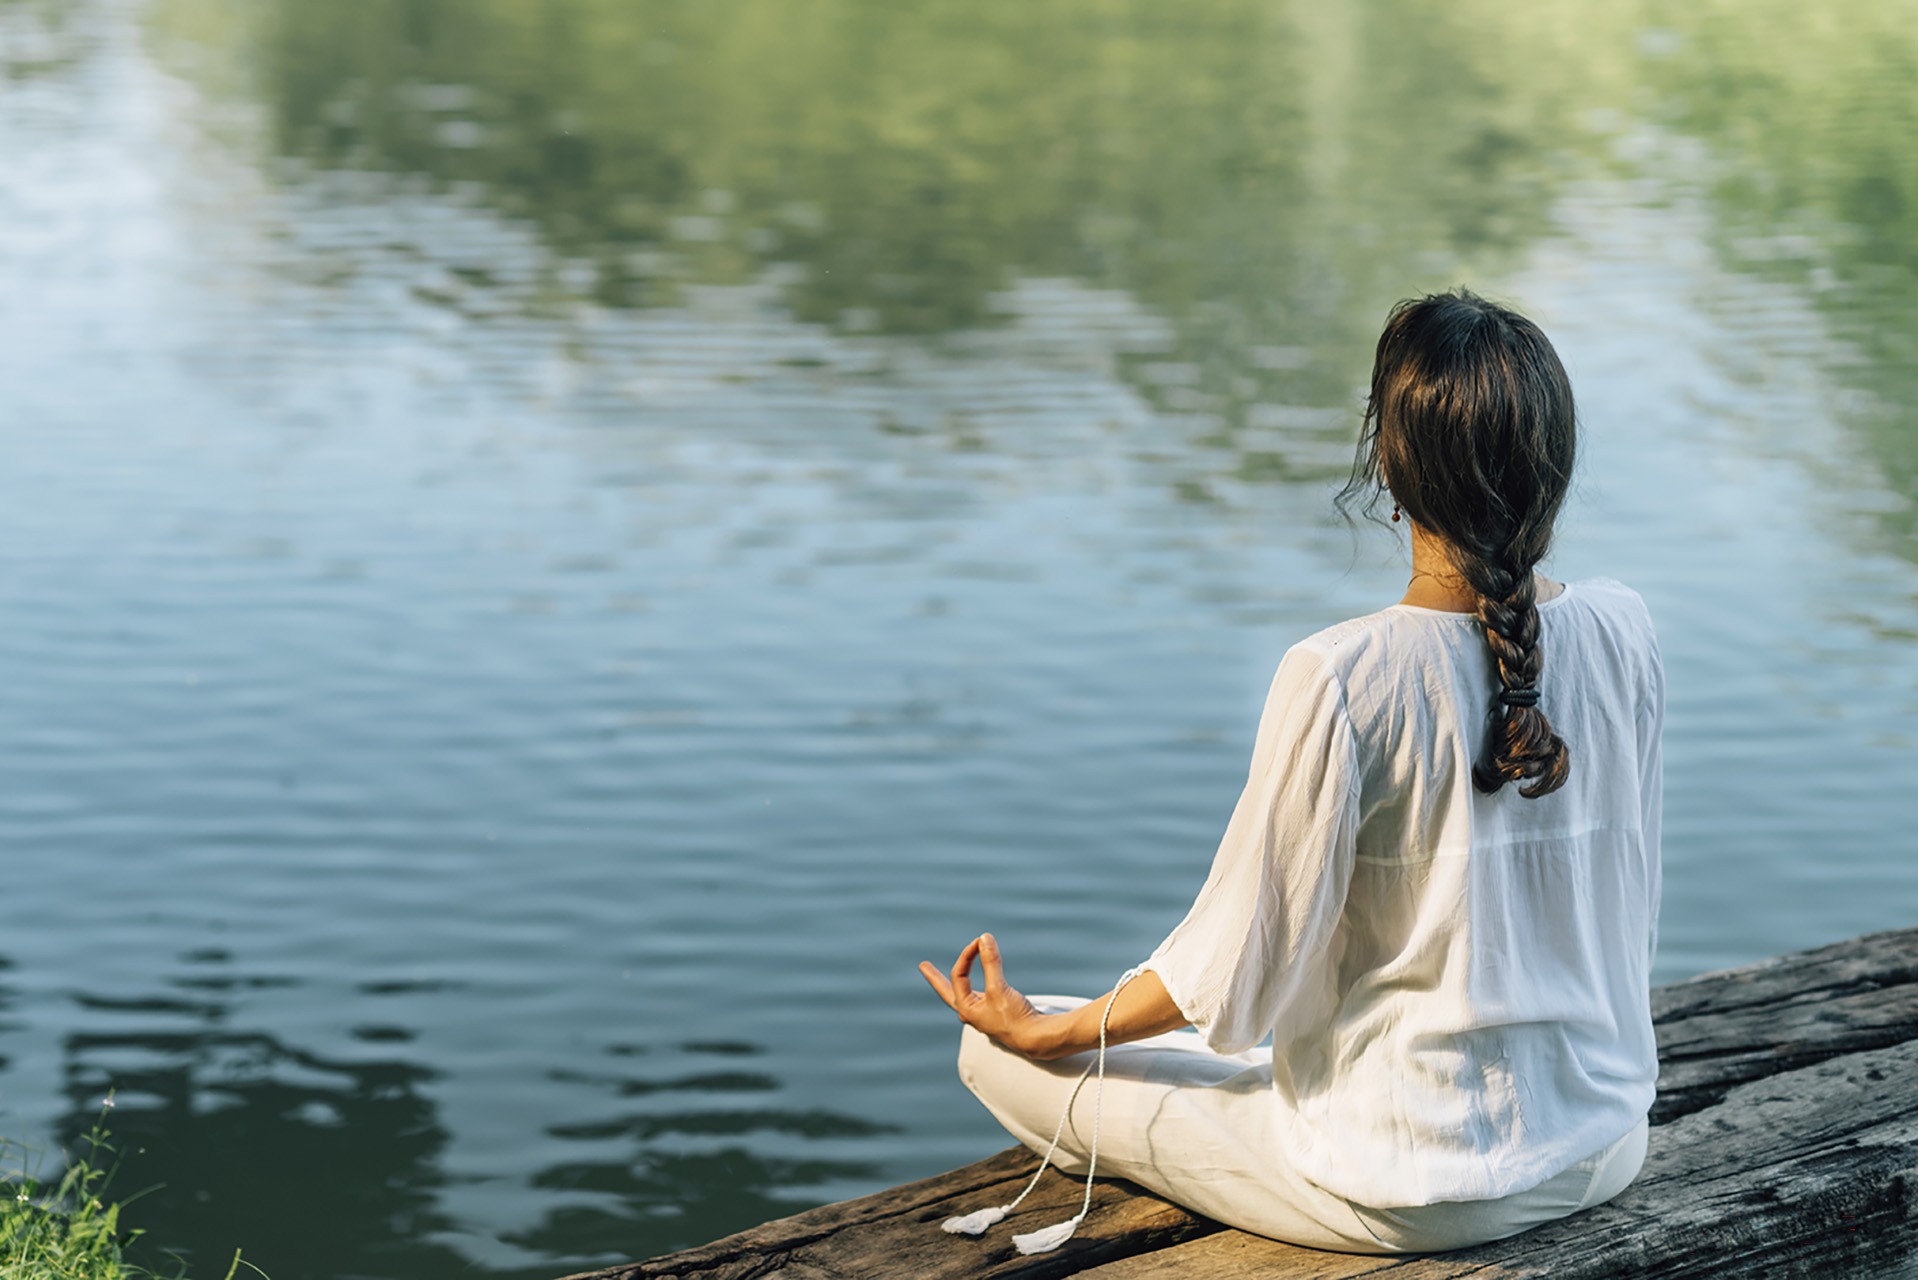 Yoga Retreat. Peaceful young woman sitting in lotus position and meditating by the lake